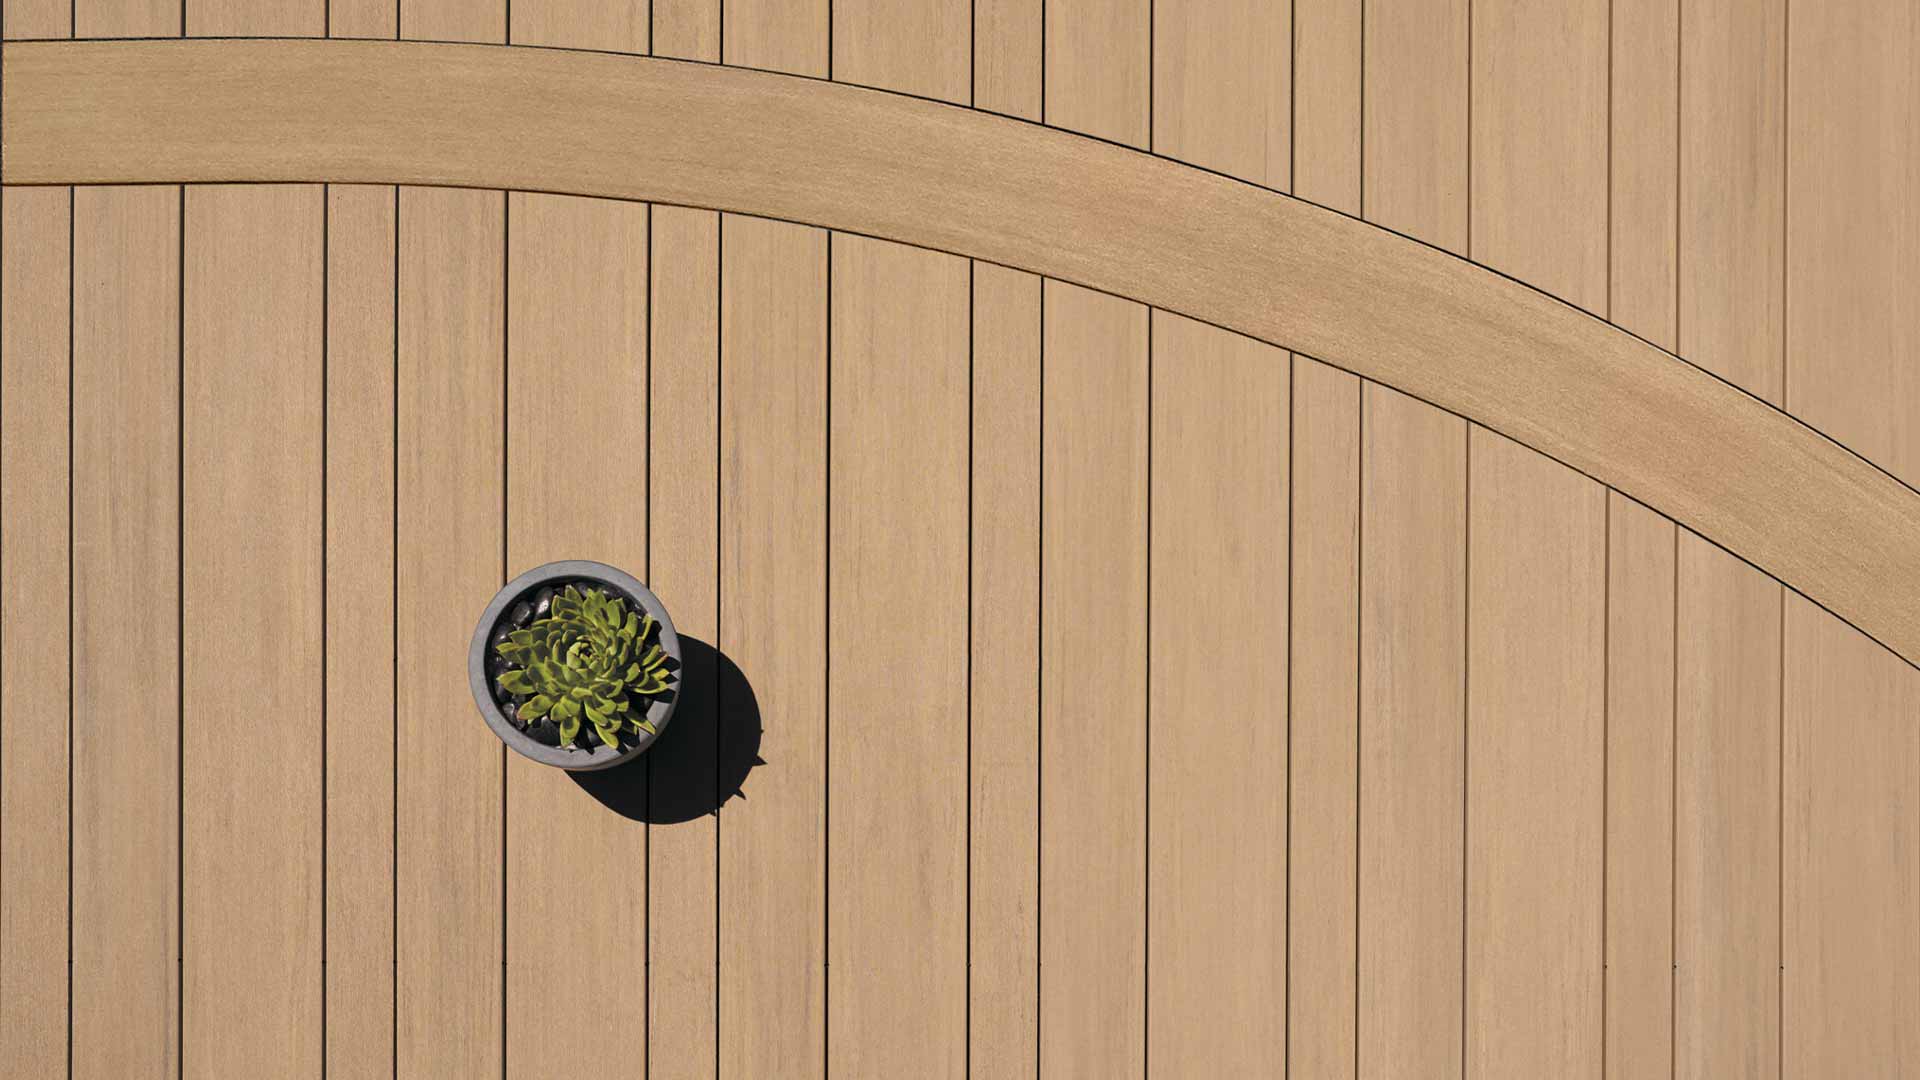 Detail shot of multiwidth and curved deck board design